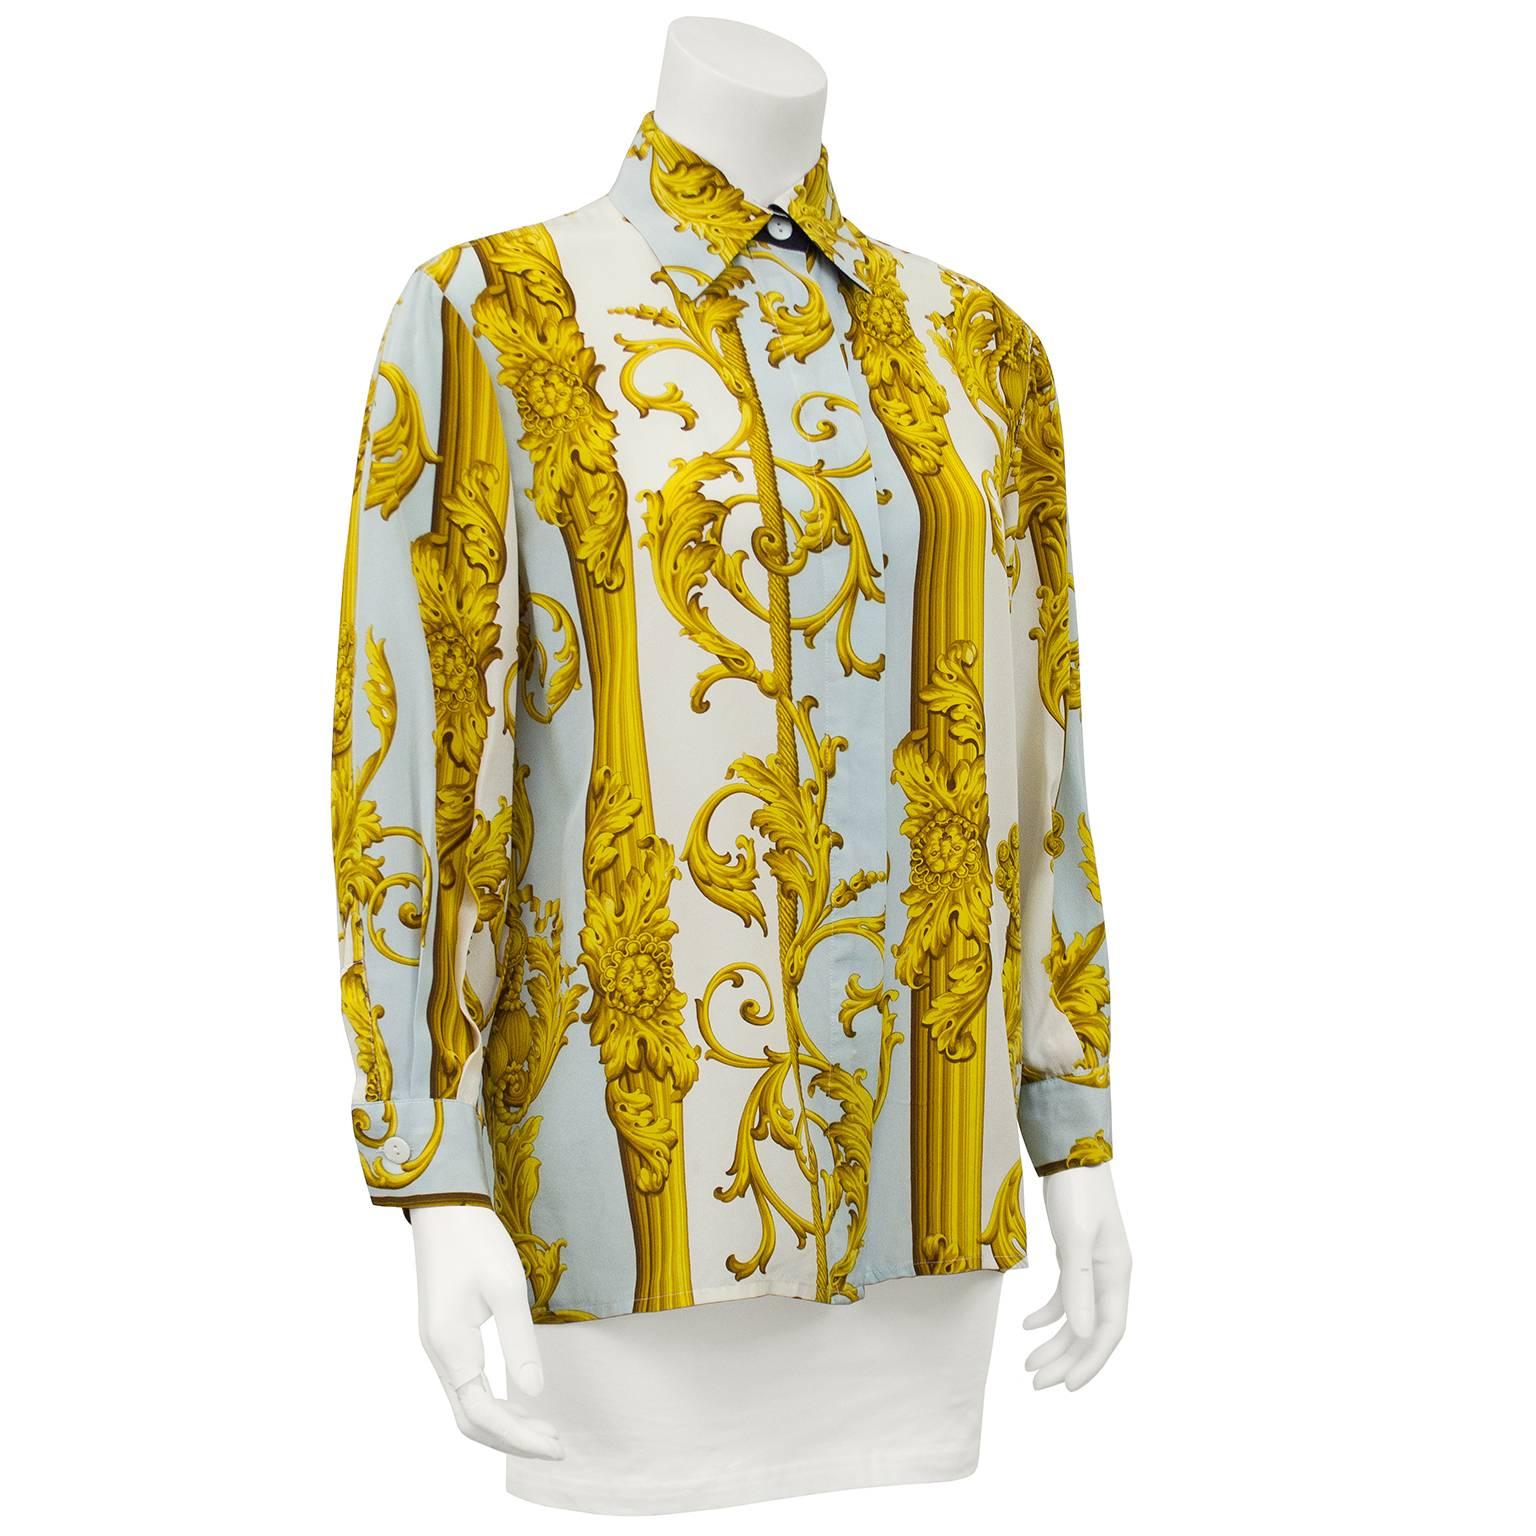 Stunning Studio 0001 by Gianfranco Ferre silk ladies shirt with button front, collar and cuffs. A look that defined the era, luxury fabrics printed with opulent baroque designs in cream, blue and gold tones. Very Versace in its graphic style. In